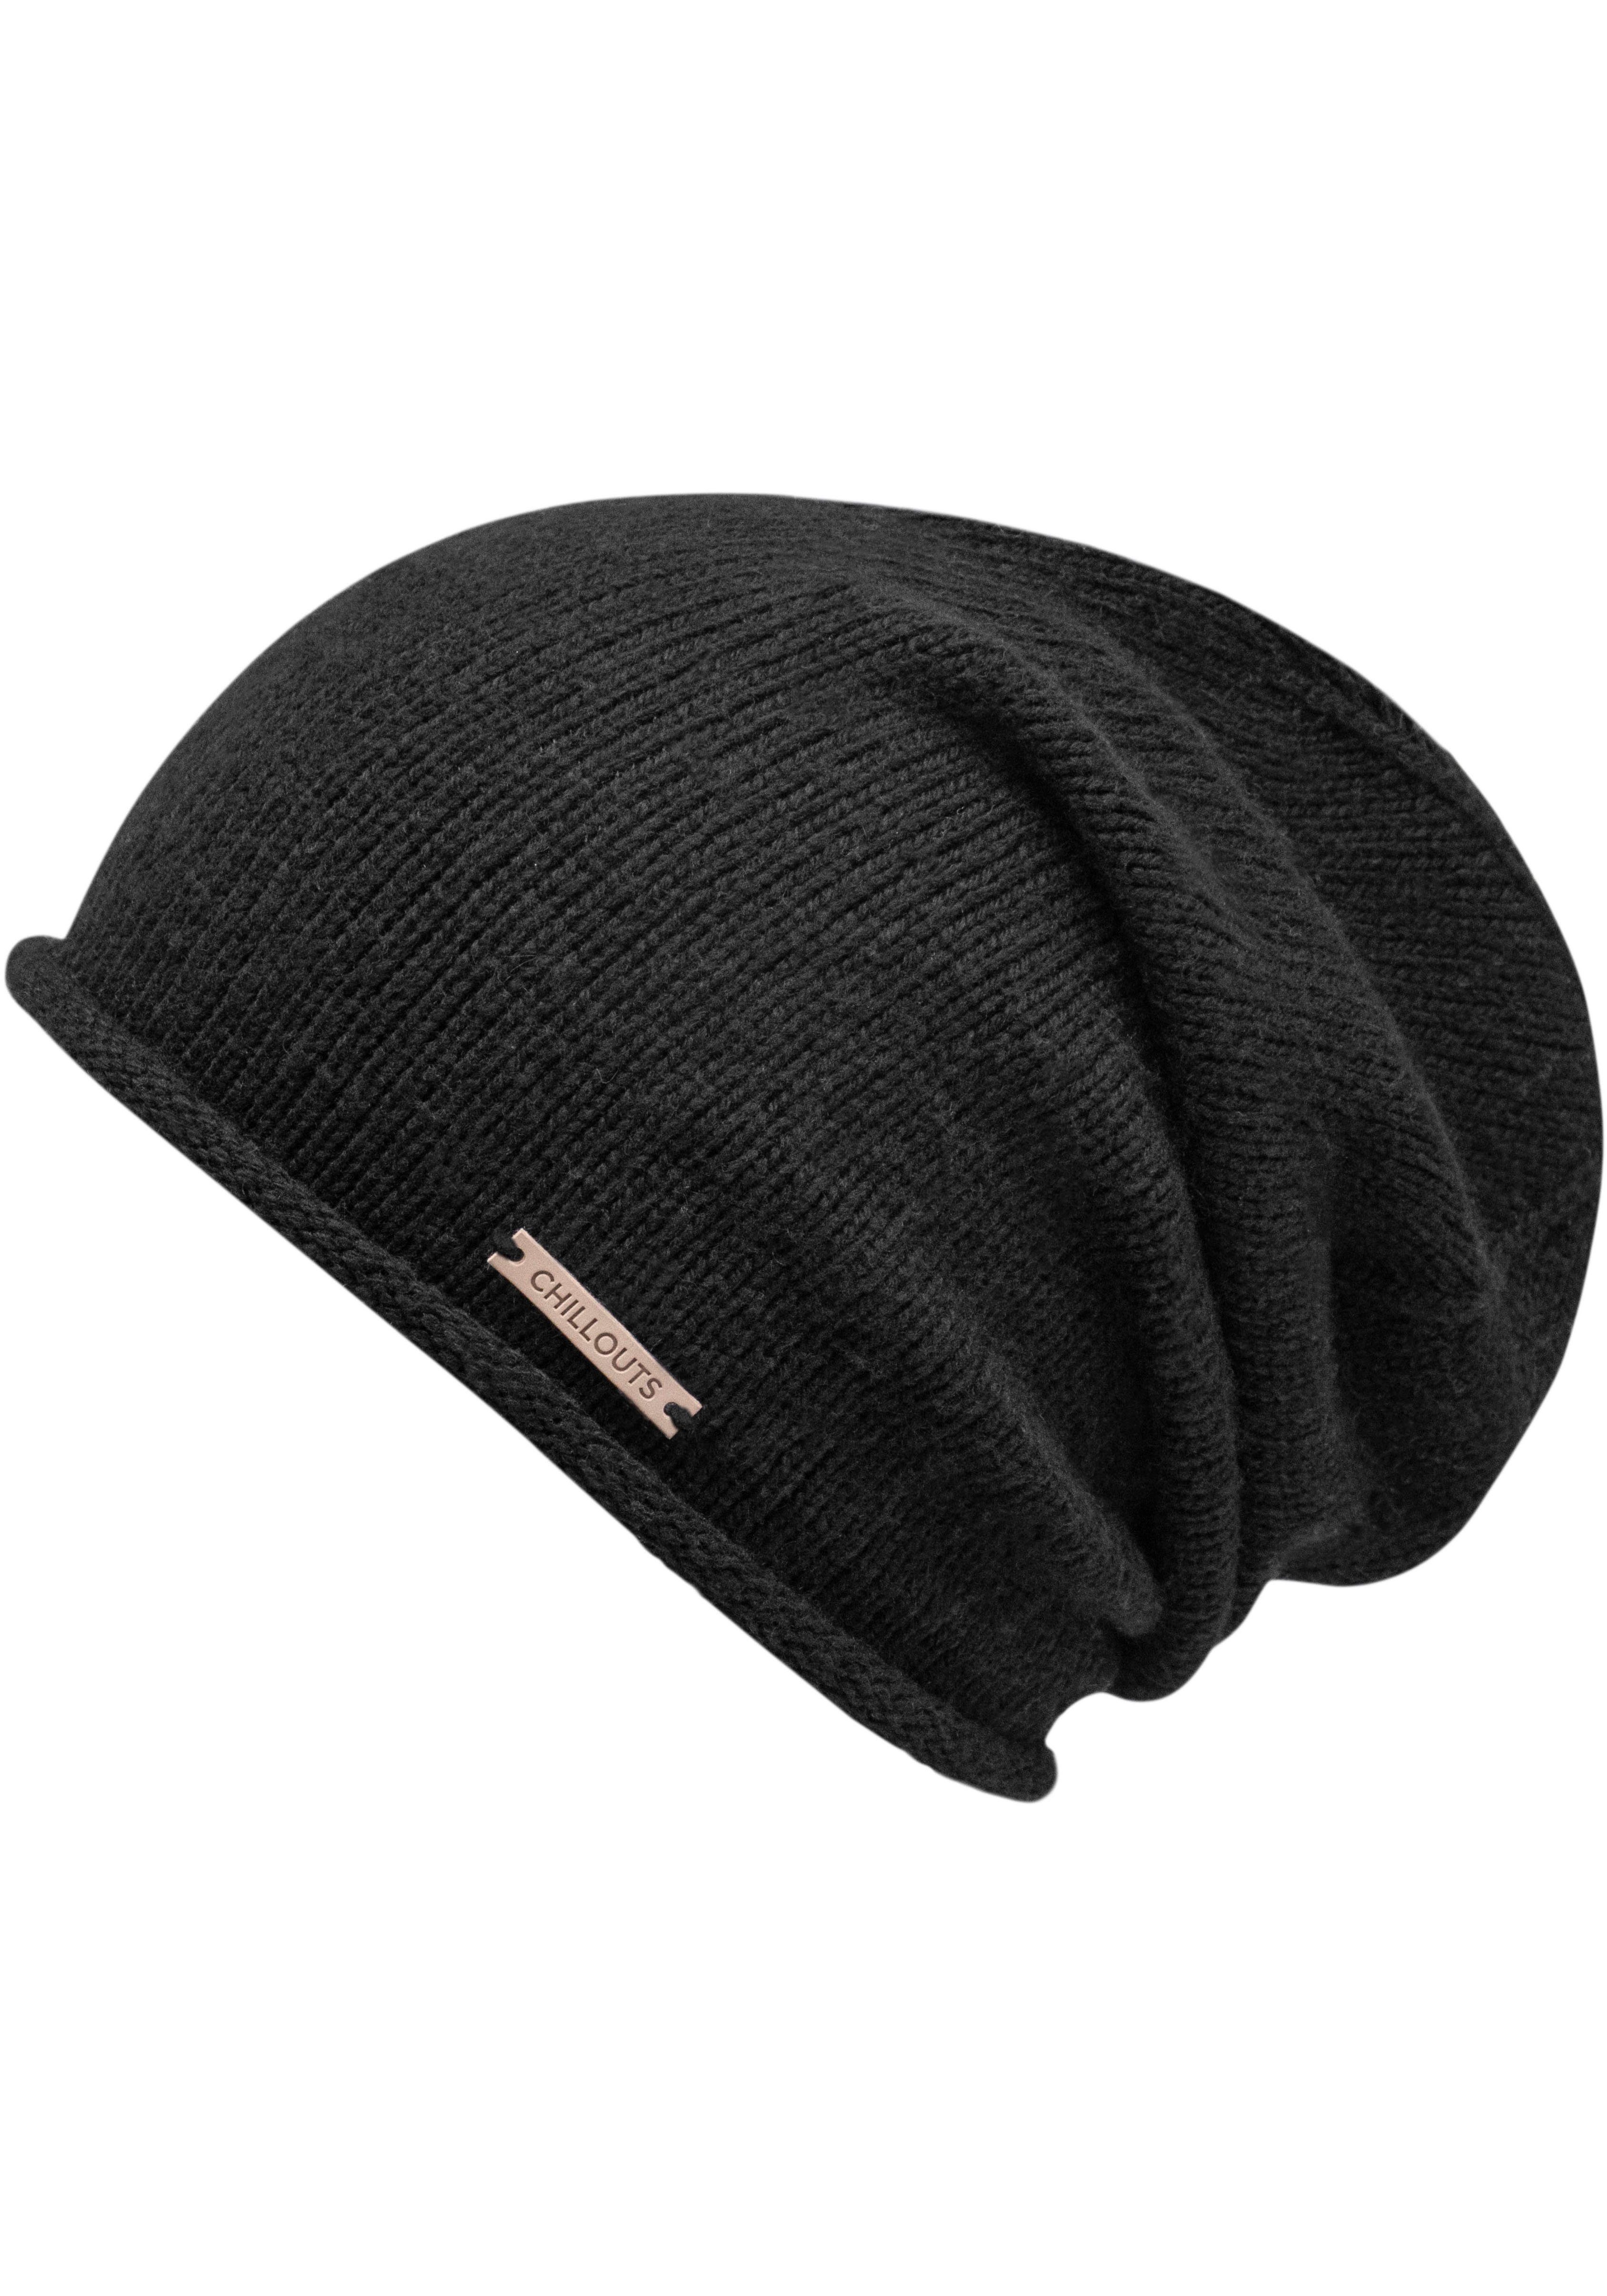 chillouts Beanie Janet Hat black